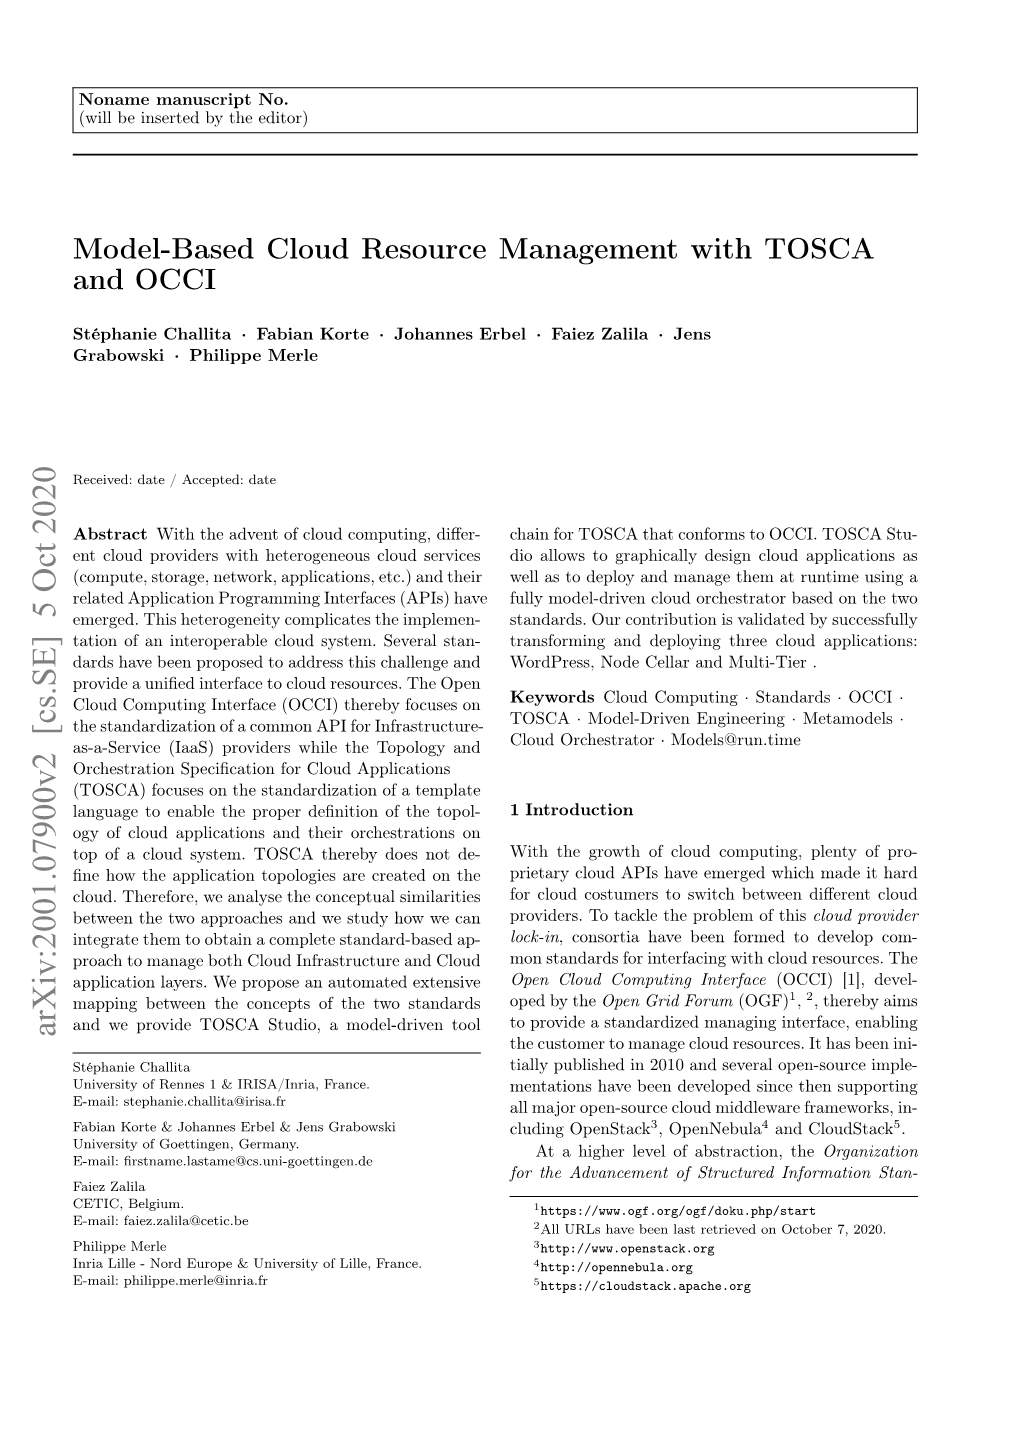 Model-Based Cloud Resource Management with TOSCA and OCCI